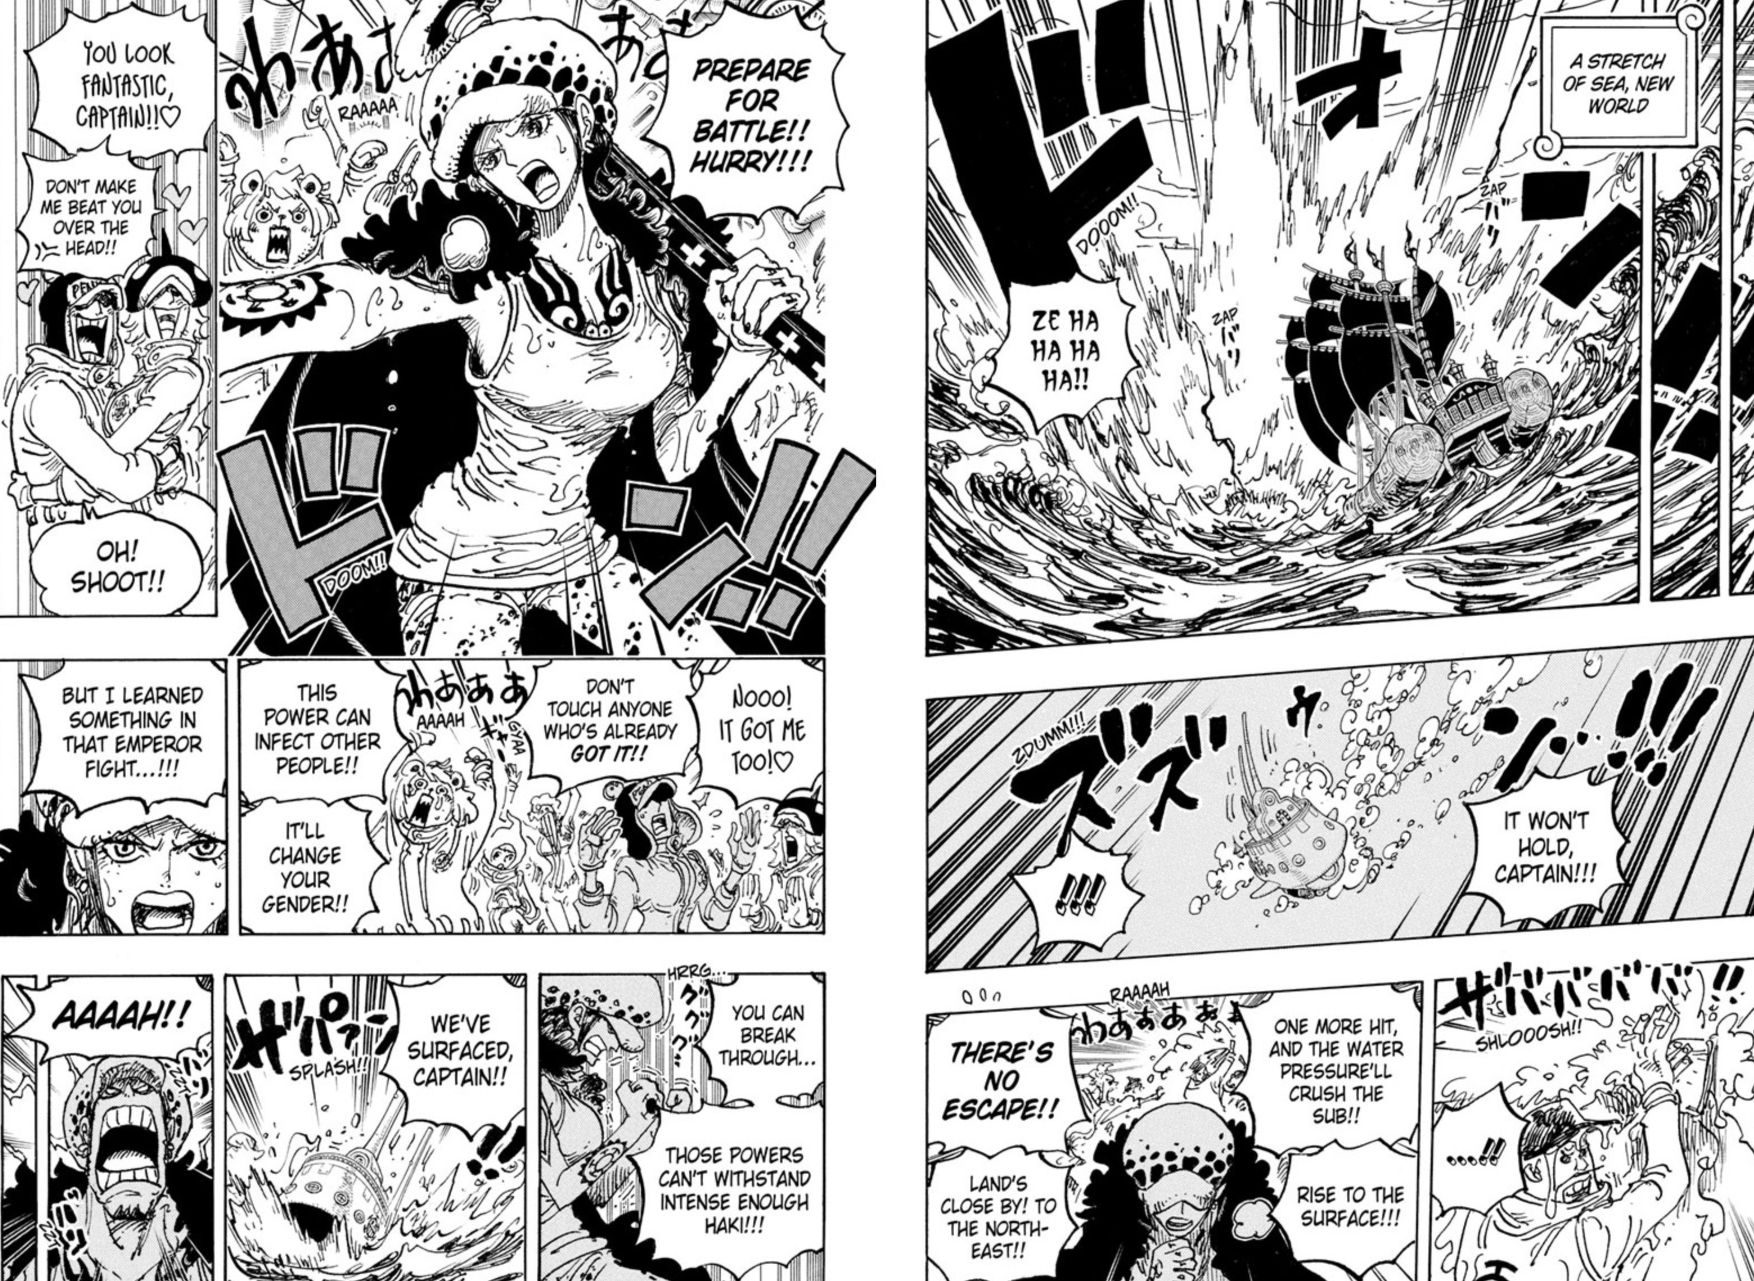 One Piece Chapter 1063 Pages 10-11